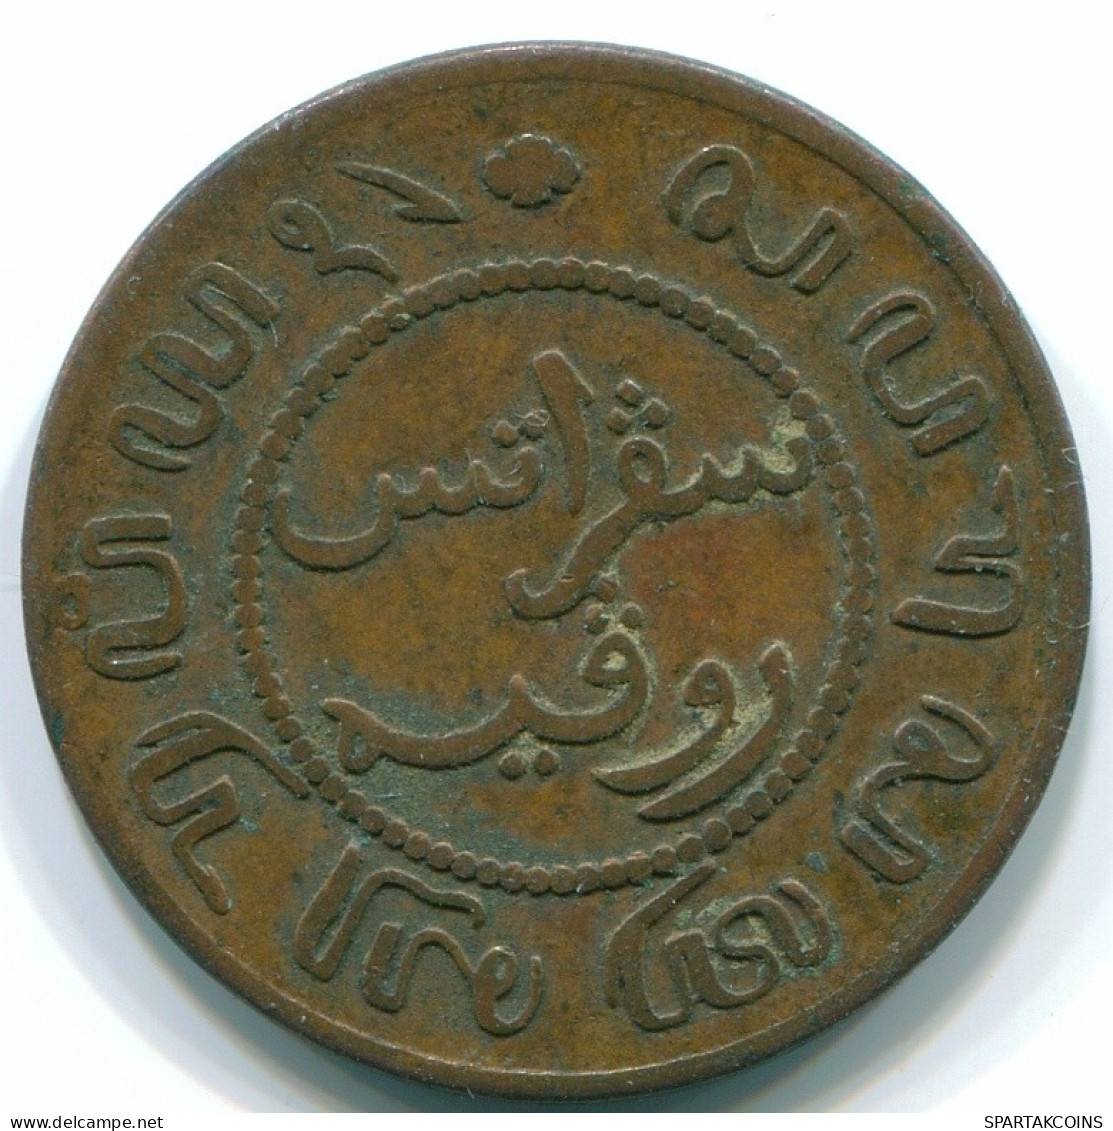 1 CENT 1857 NETHERLANDS EAST INDIES INDONESIA Copper Colonial Coin #S10033.U.A - Indes Neerlandesas